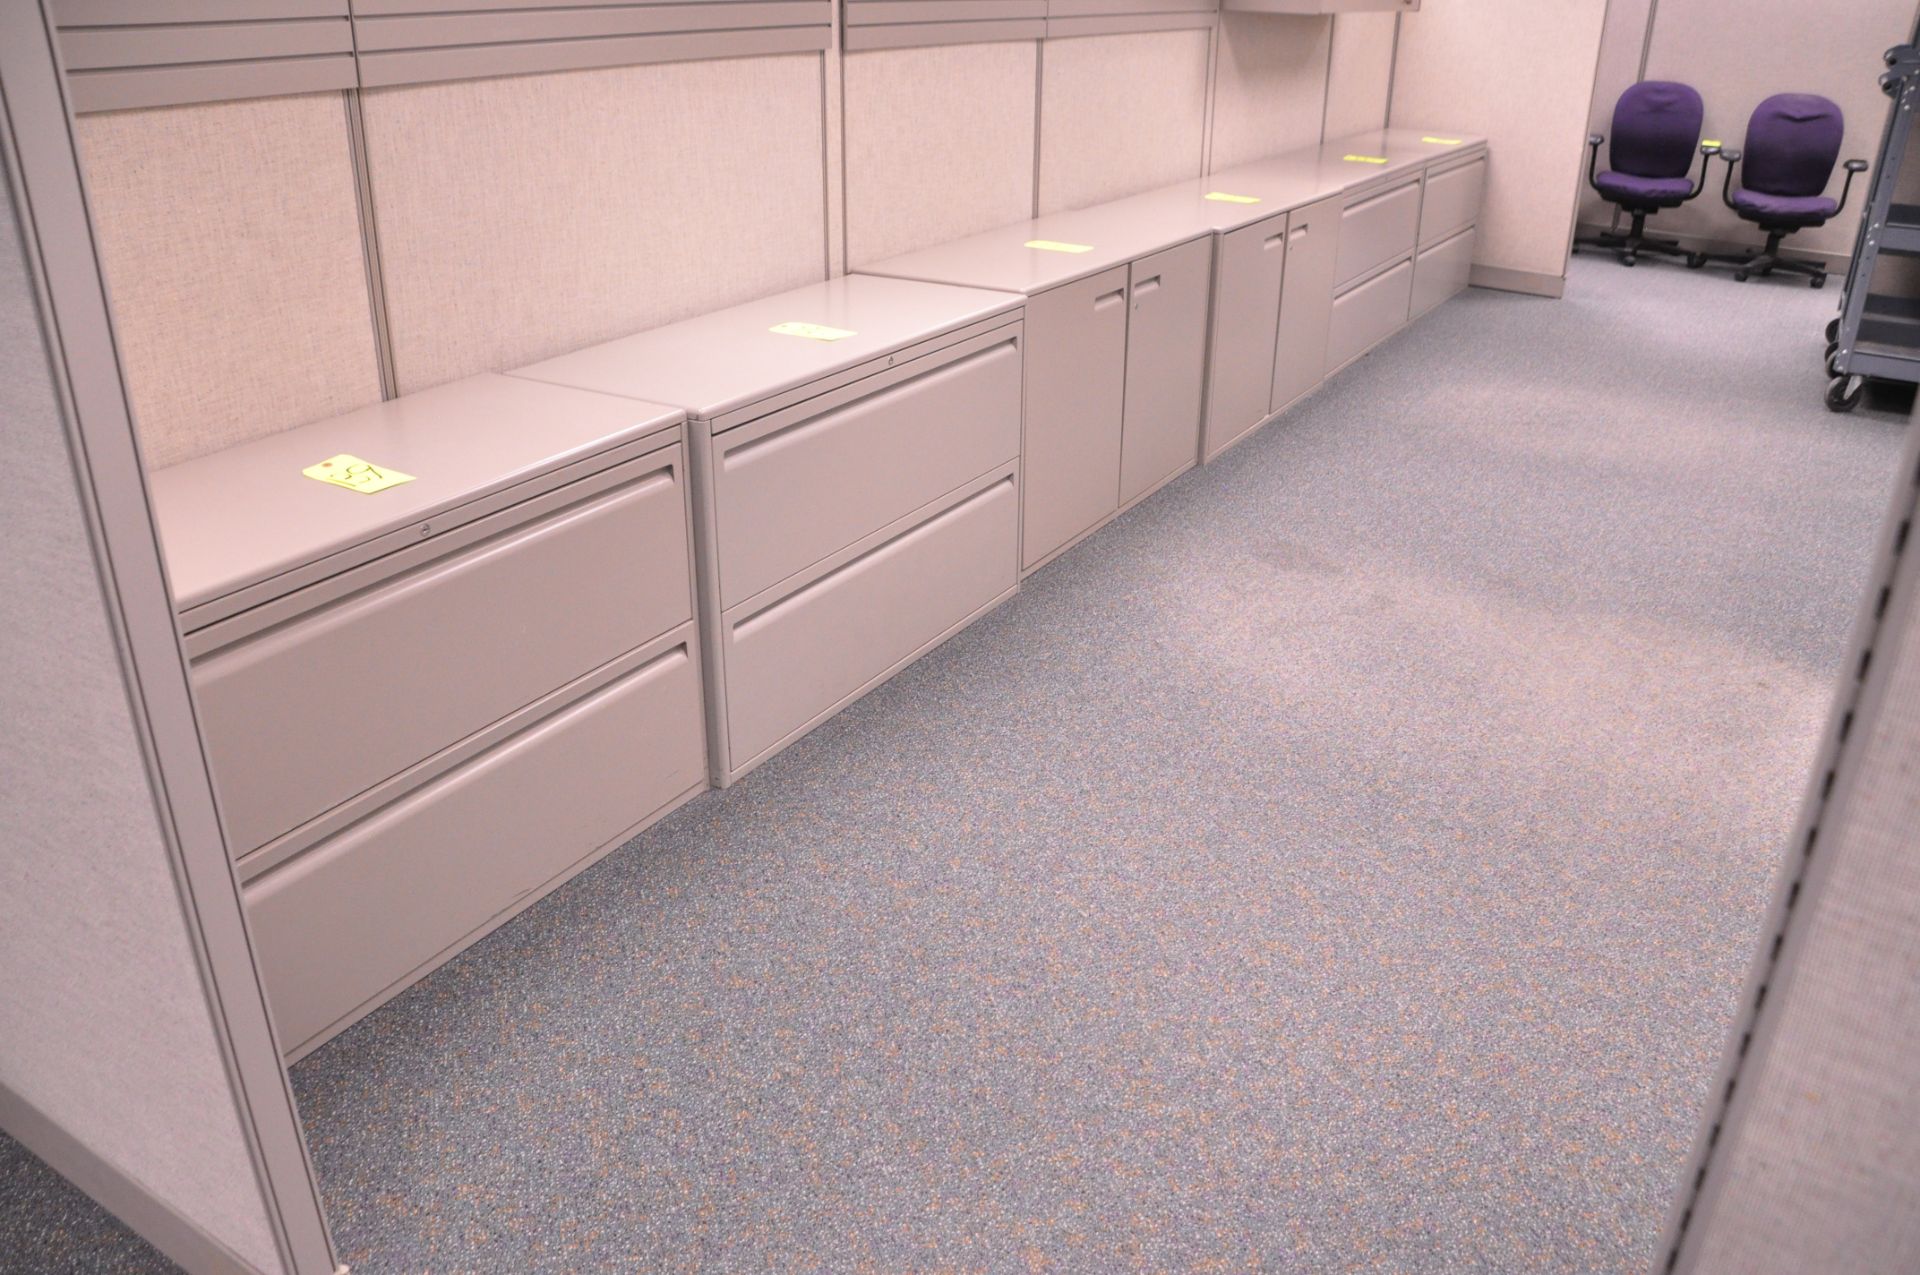 Lot-(4) 2-Drawer Lateral File Cabinets, (Beige), and (2) 2-Door Short Cabinets, (Beige) in (1) - Image 2 of 2